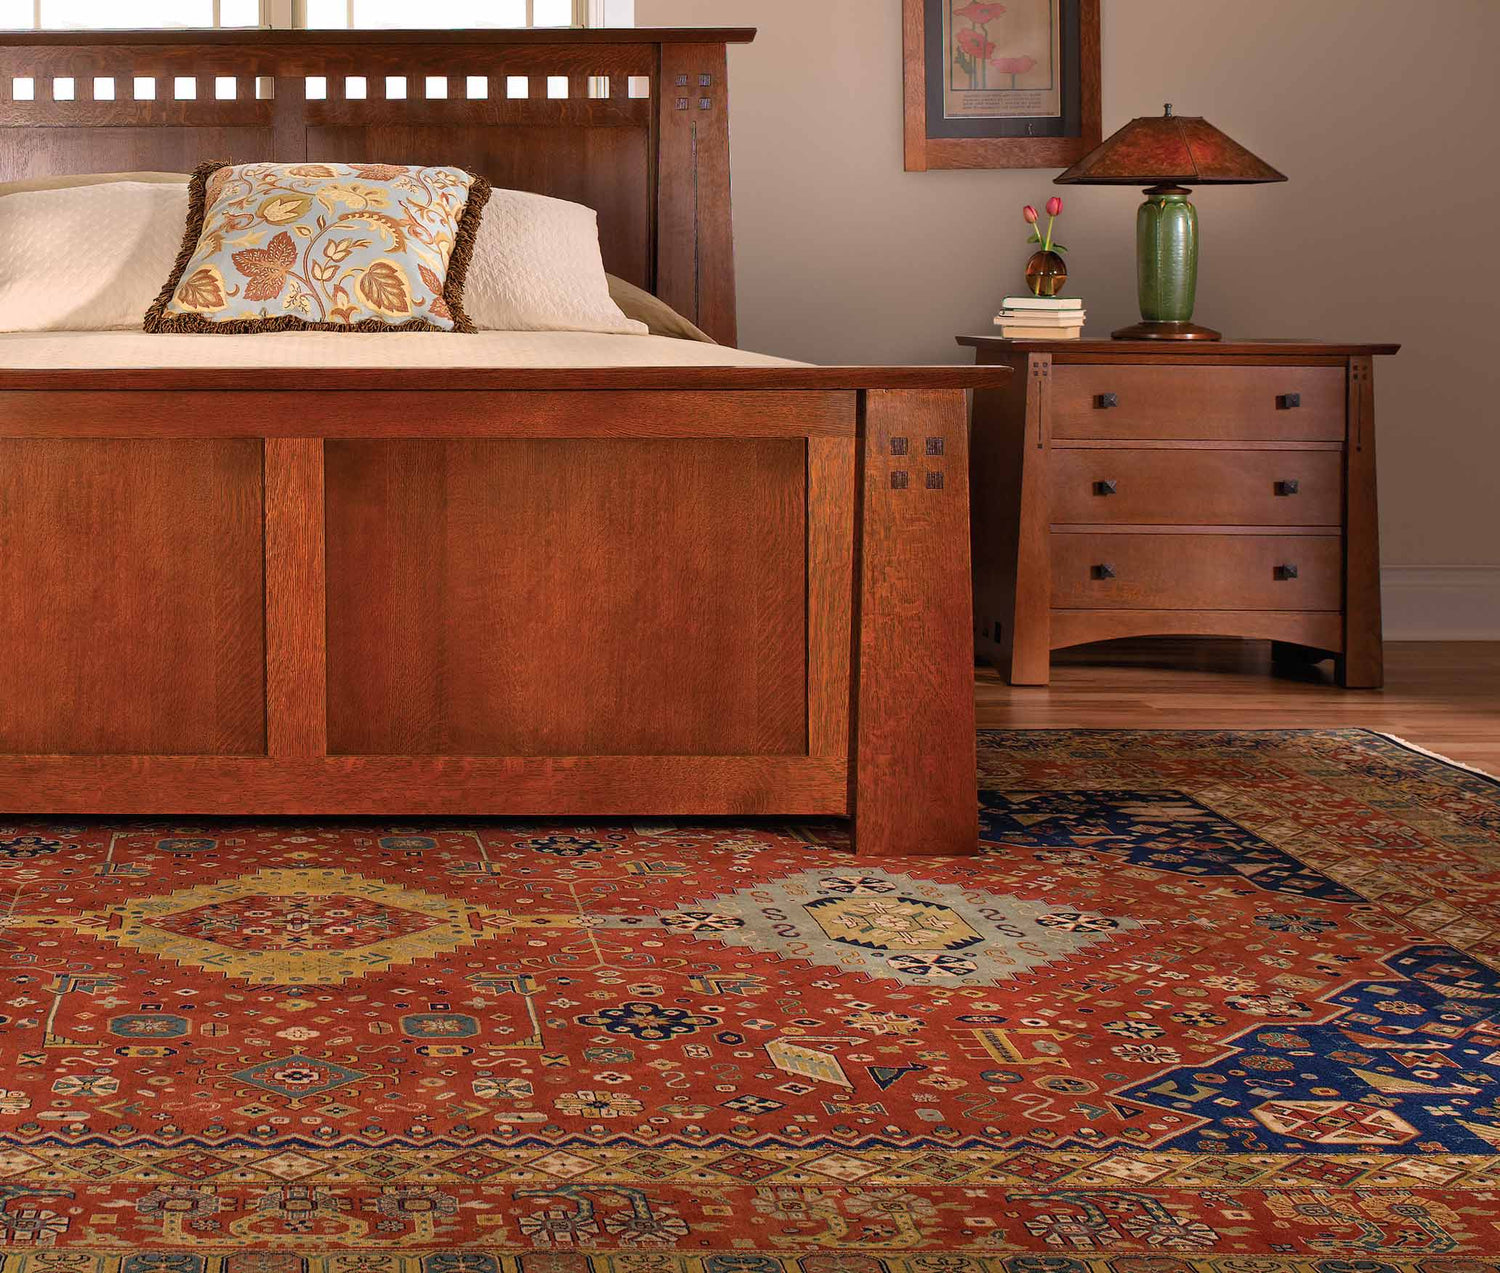 Lifestyle of an Anatolia Rug in the rust color with a Highlands bed sitting on top of it